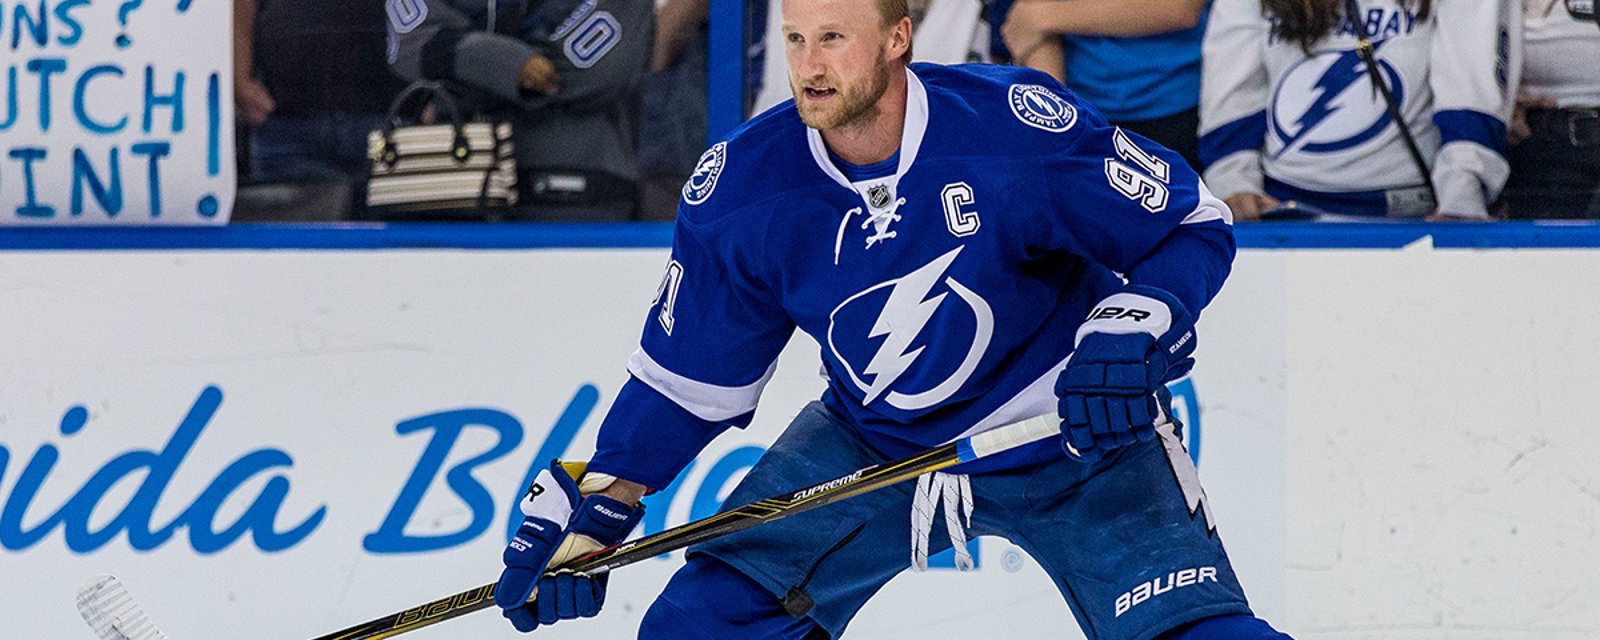 Your Call: Will Stamkos ever hit 50 goals again?